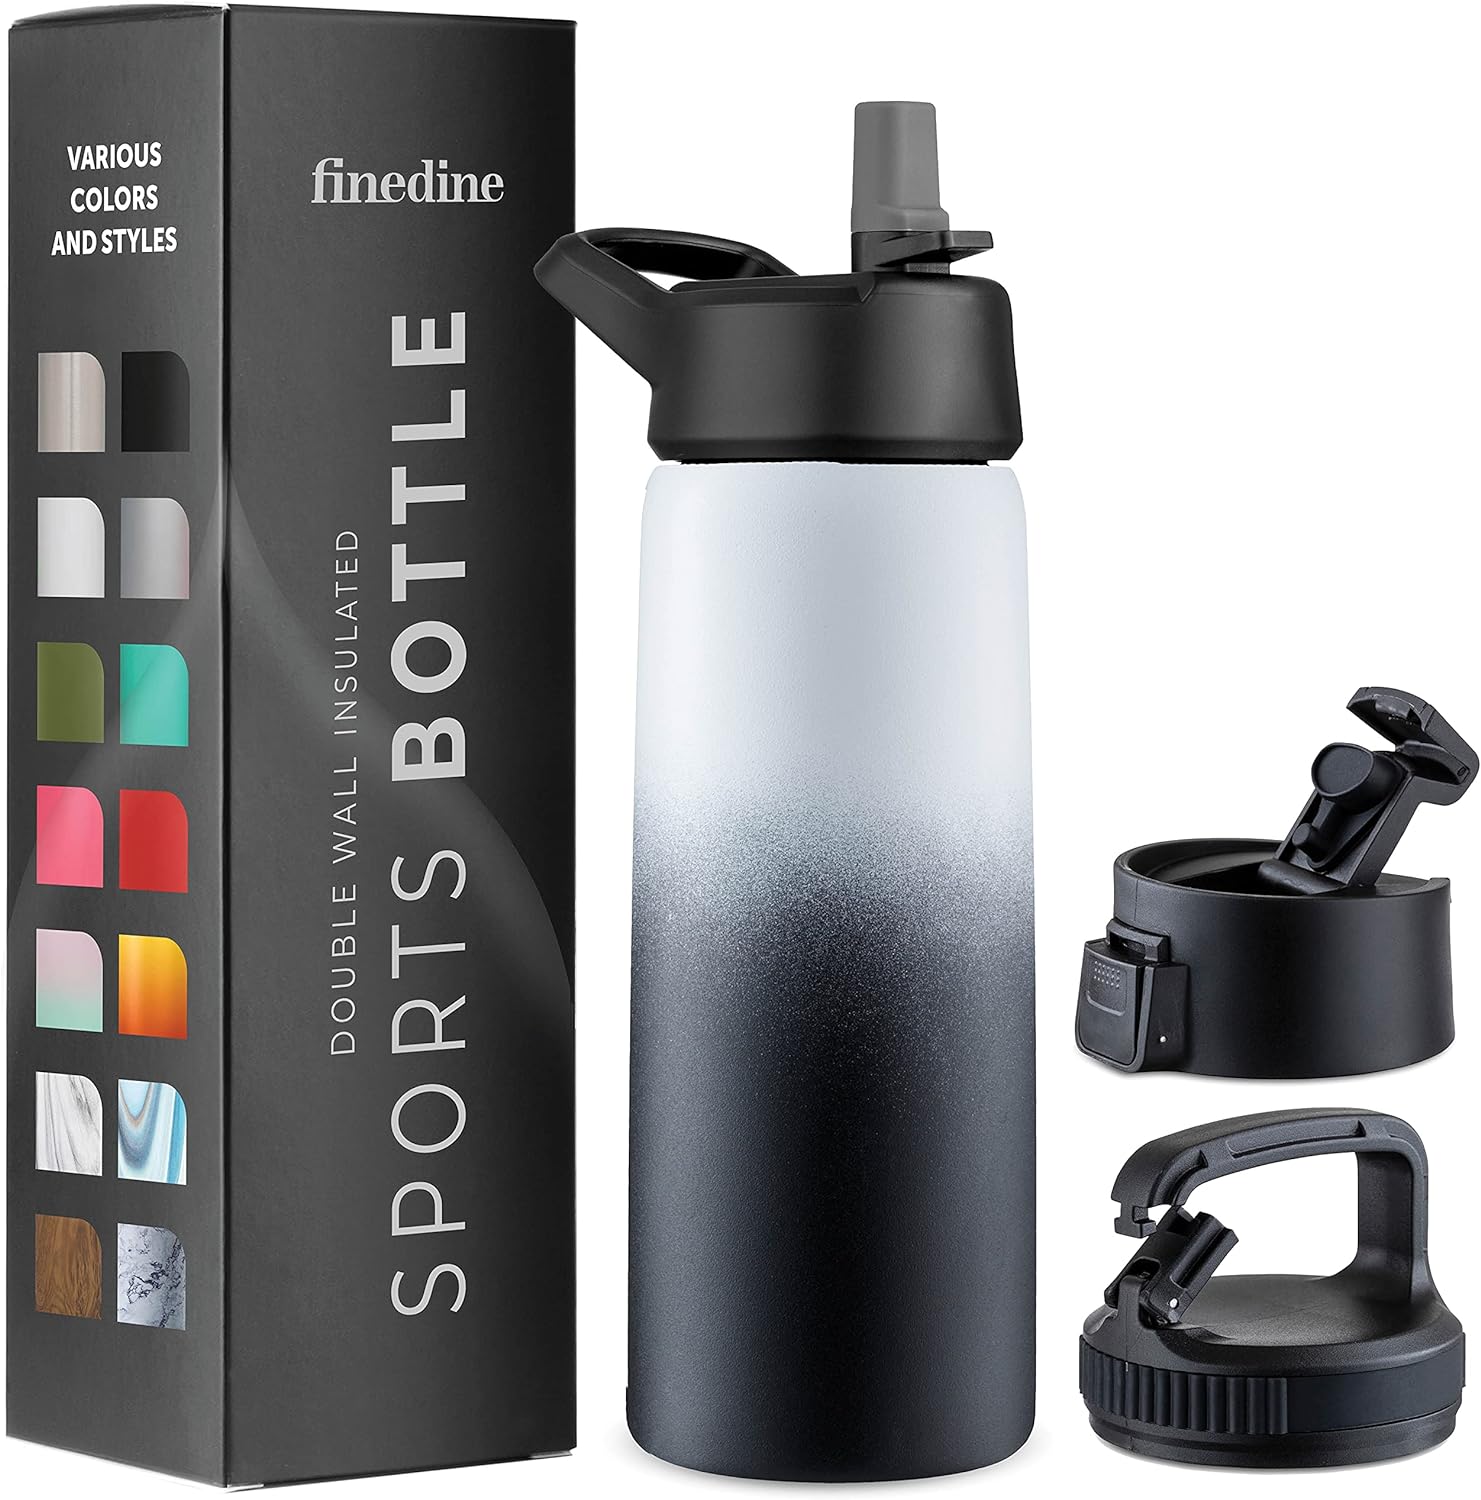 FineDine Insulated Water Bottles with Straw - 25 Oz Stainless Steel Metal Water Bottle W/ 3 Lids - Reusable for Travel, Camping, Bike, Sports - Dreamy Black-White